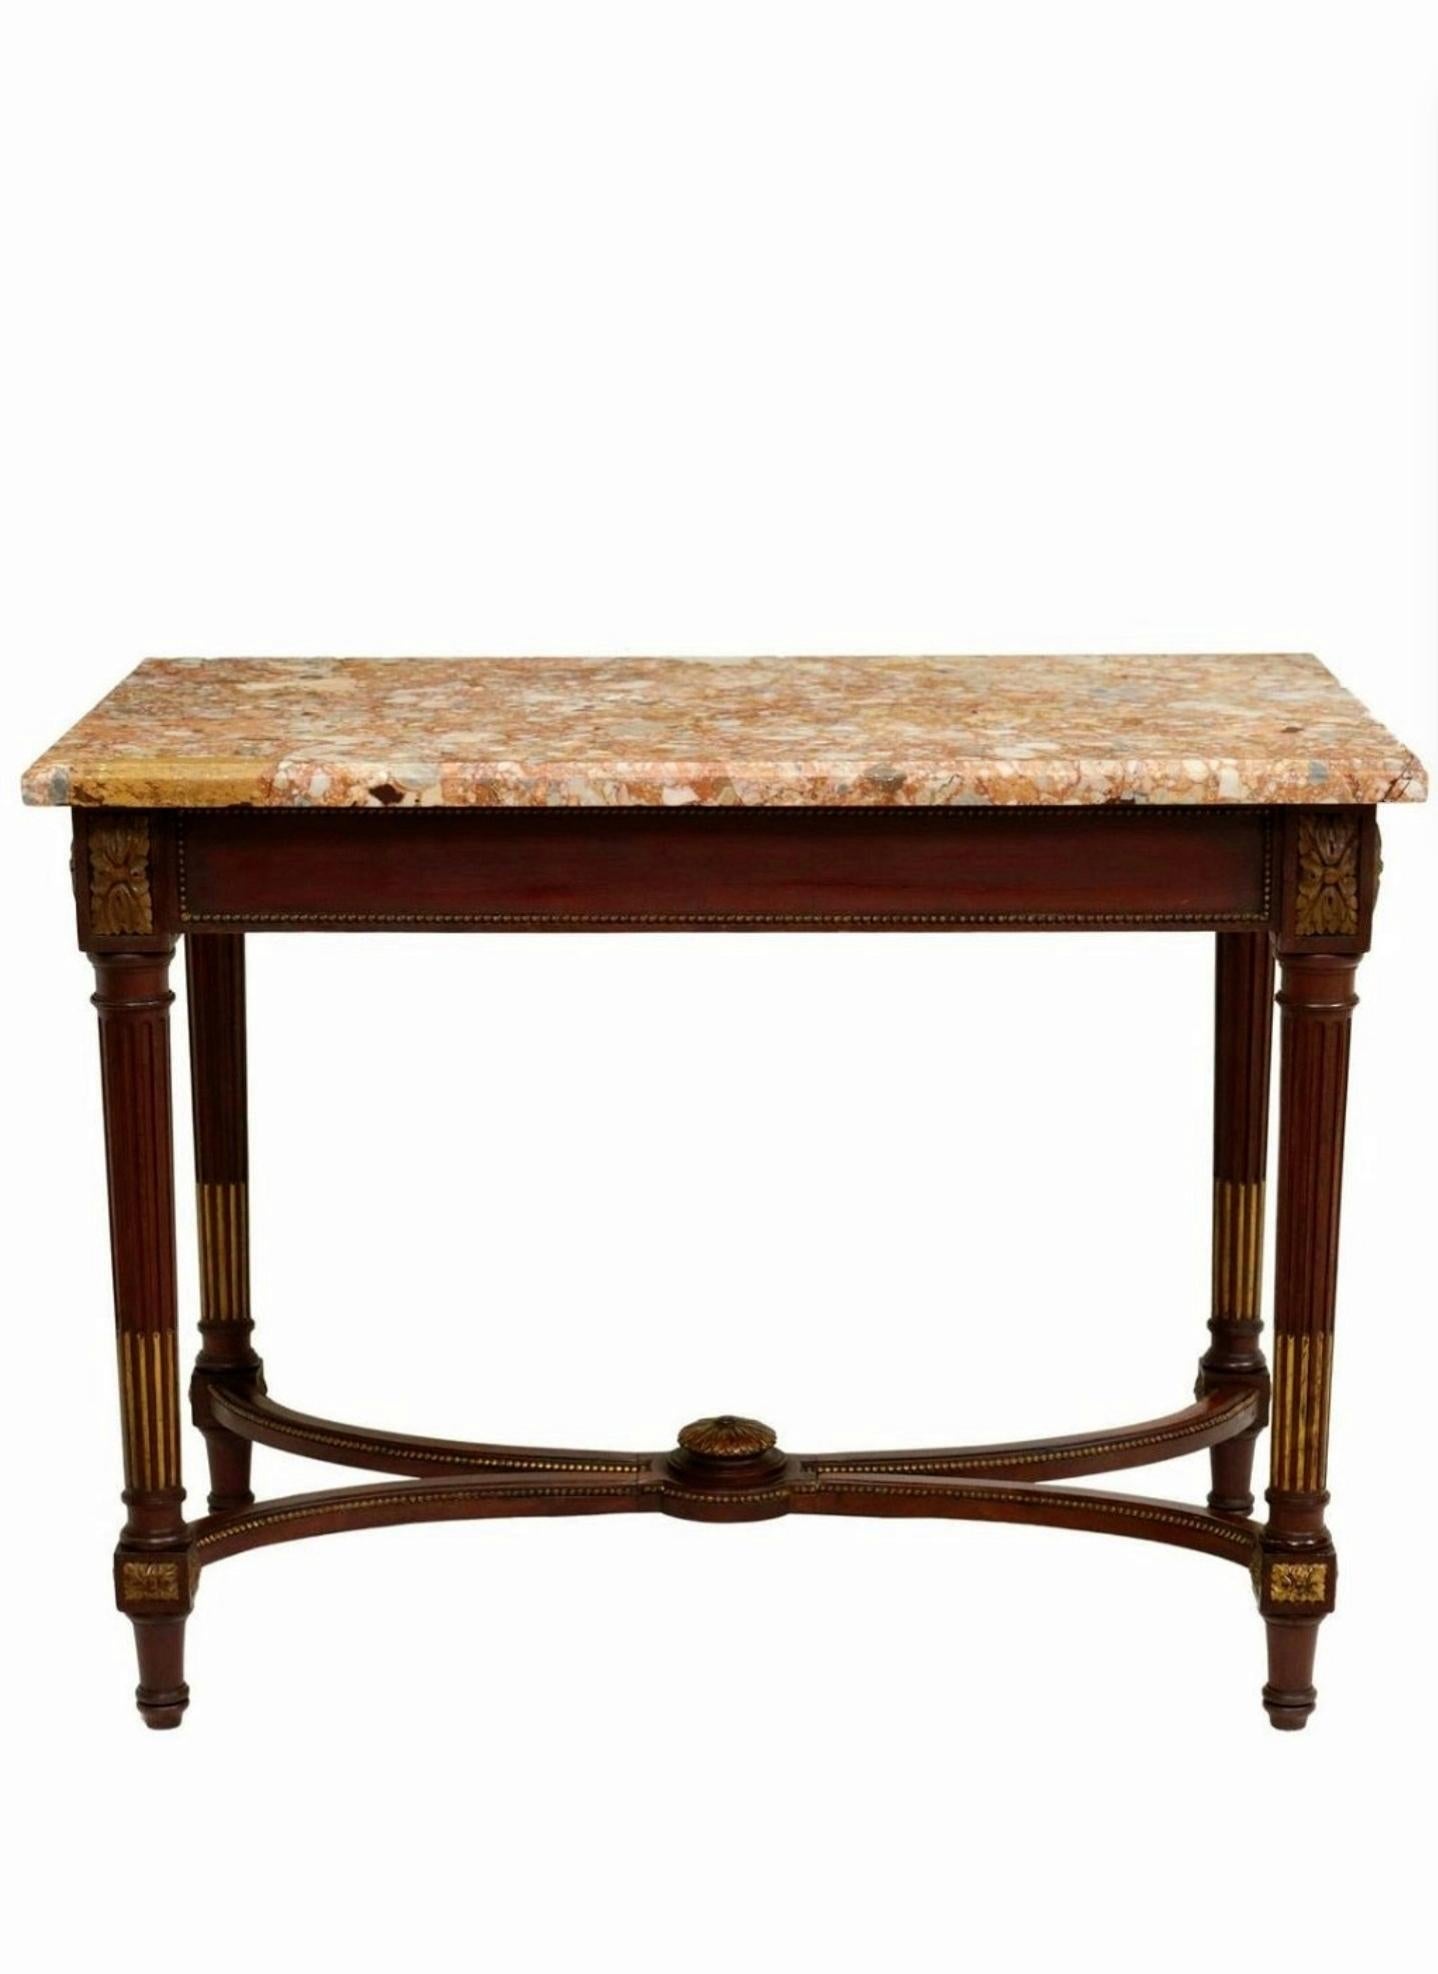 A lovely antique French Louis XVI style mahogany centre table. 

Hand-crafted in France in the late 19th / early 20th century, exceptionally executed in sophisticated 18th century King Louis Sixteenth taste, topped with a striking Breche d’Alep